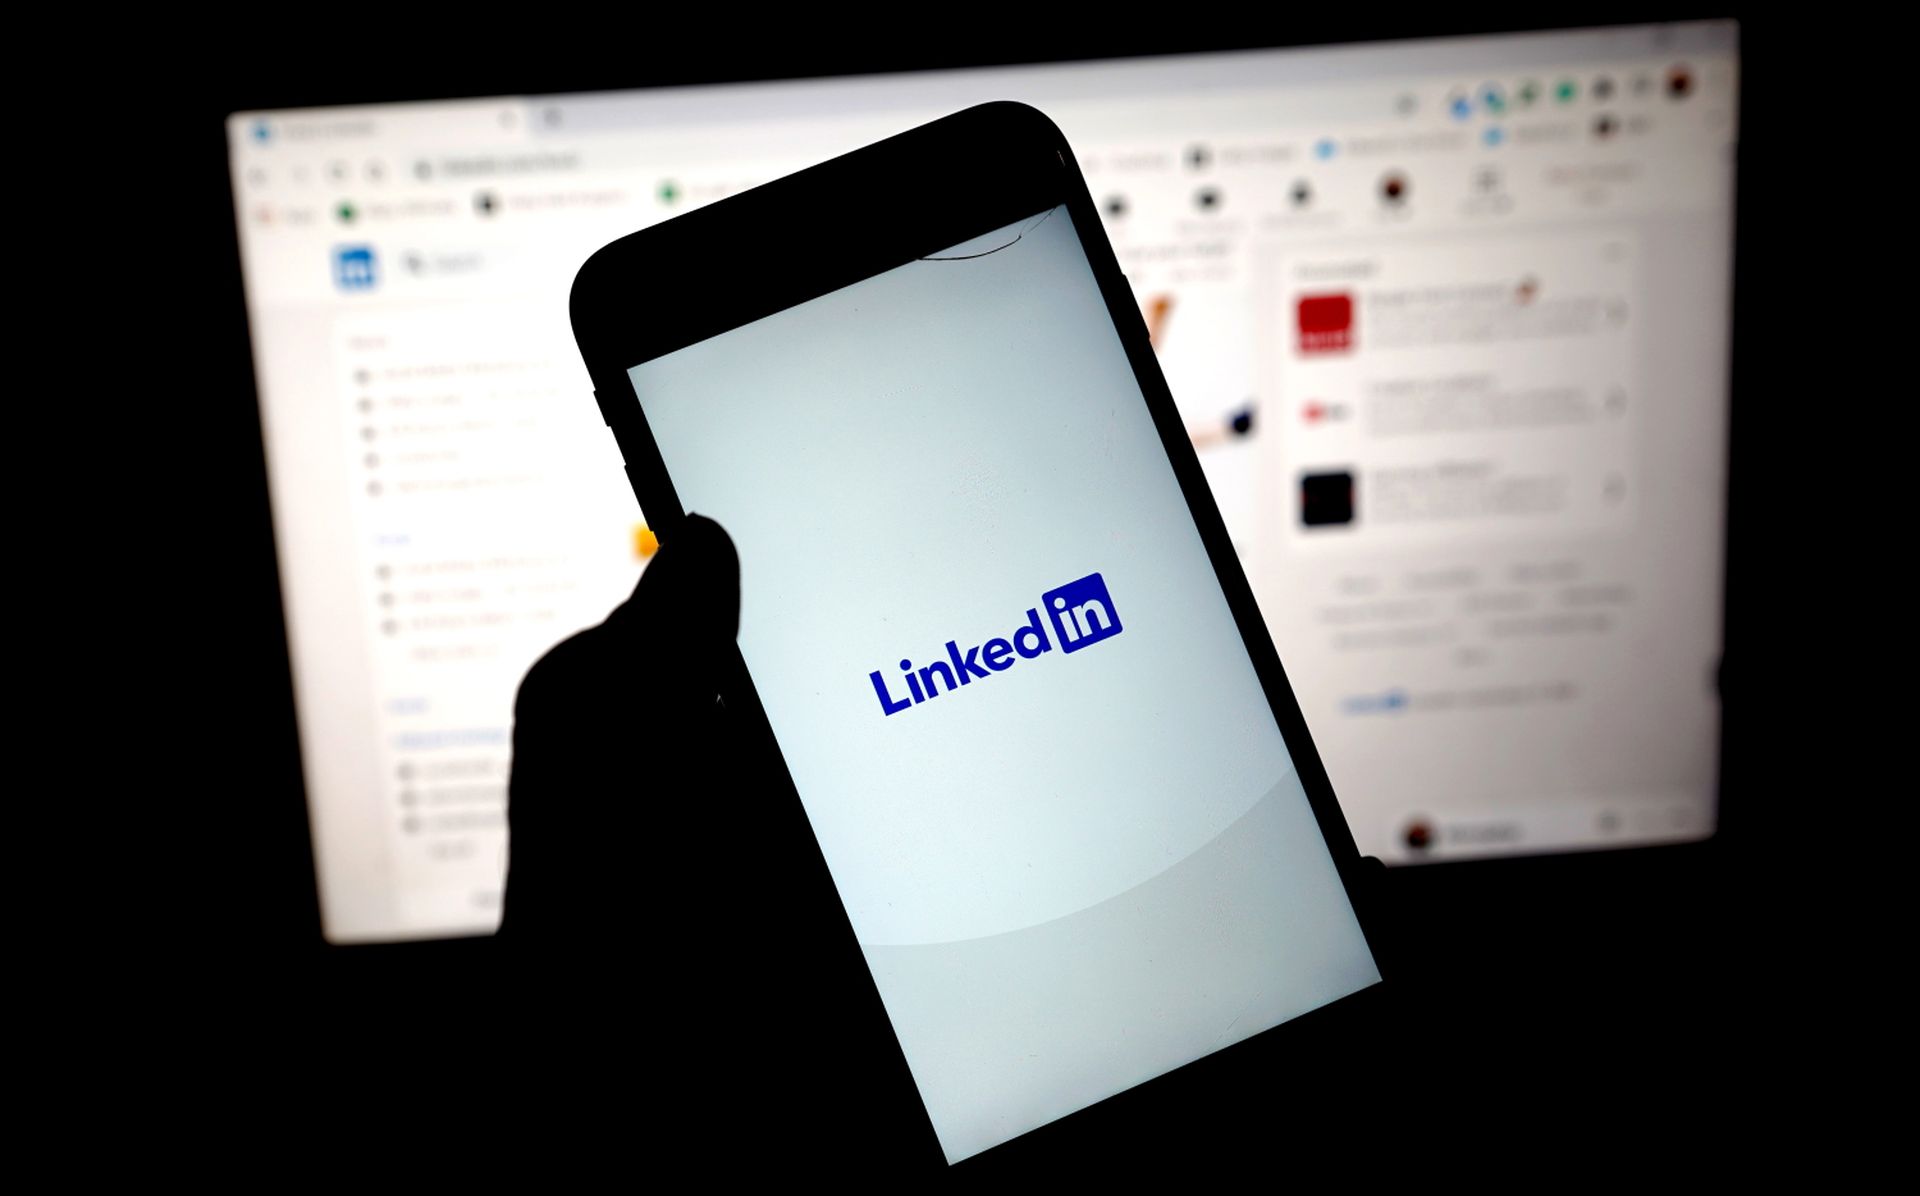 The LinkedIn app is seen on a mobile phone on Jan. 11, 2021, in London. (Edward Smith/Getty Images)